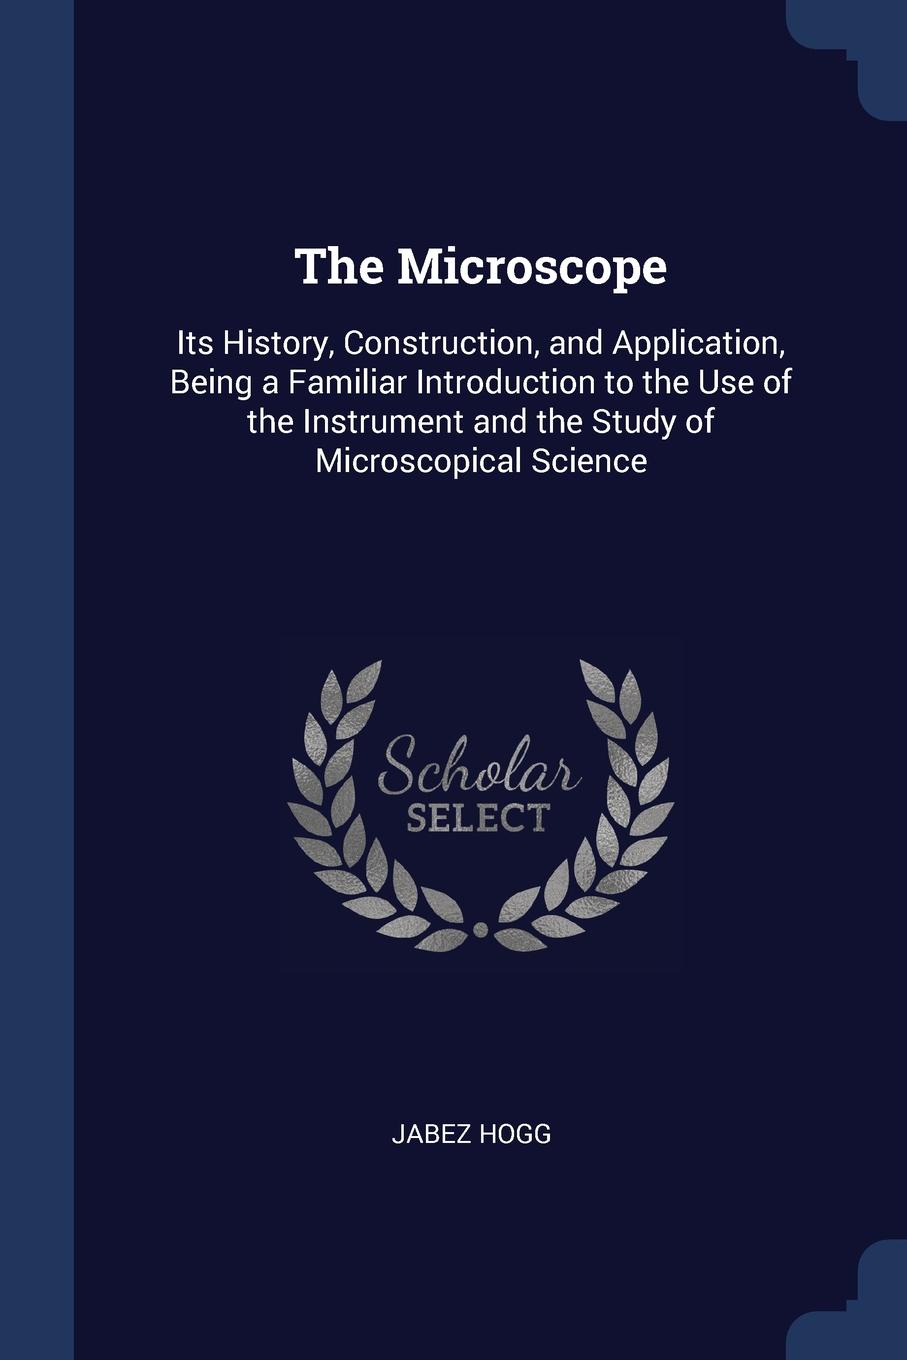 The Microscope. Its History, Construction, and Application, Being a Familiar Introduction to the Use of the Instrument and the Study of Microscopical Science